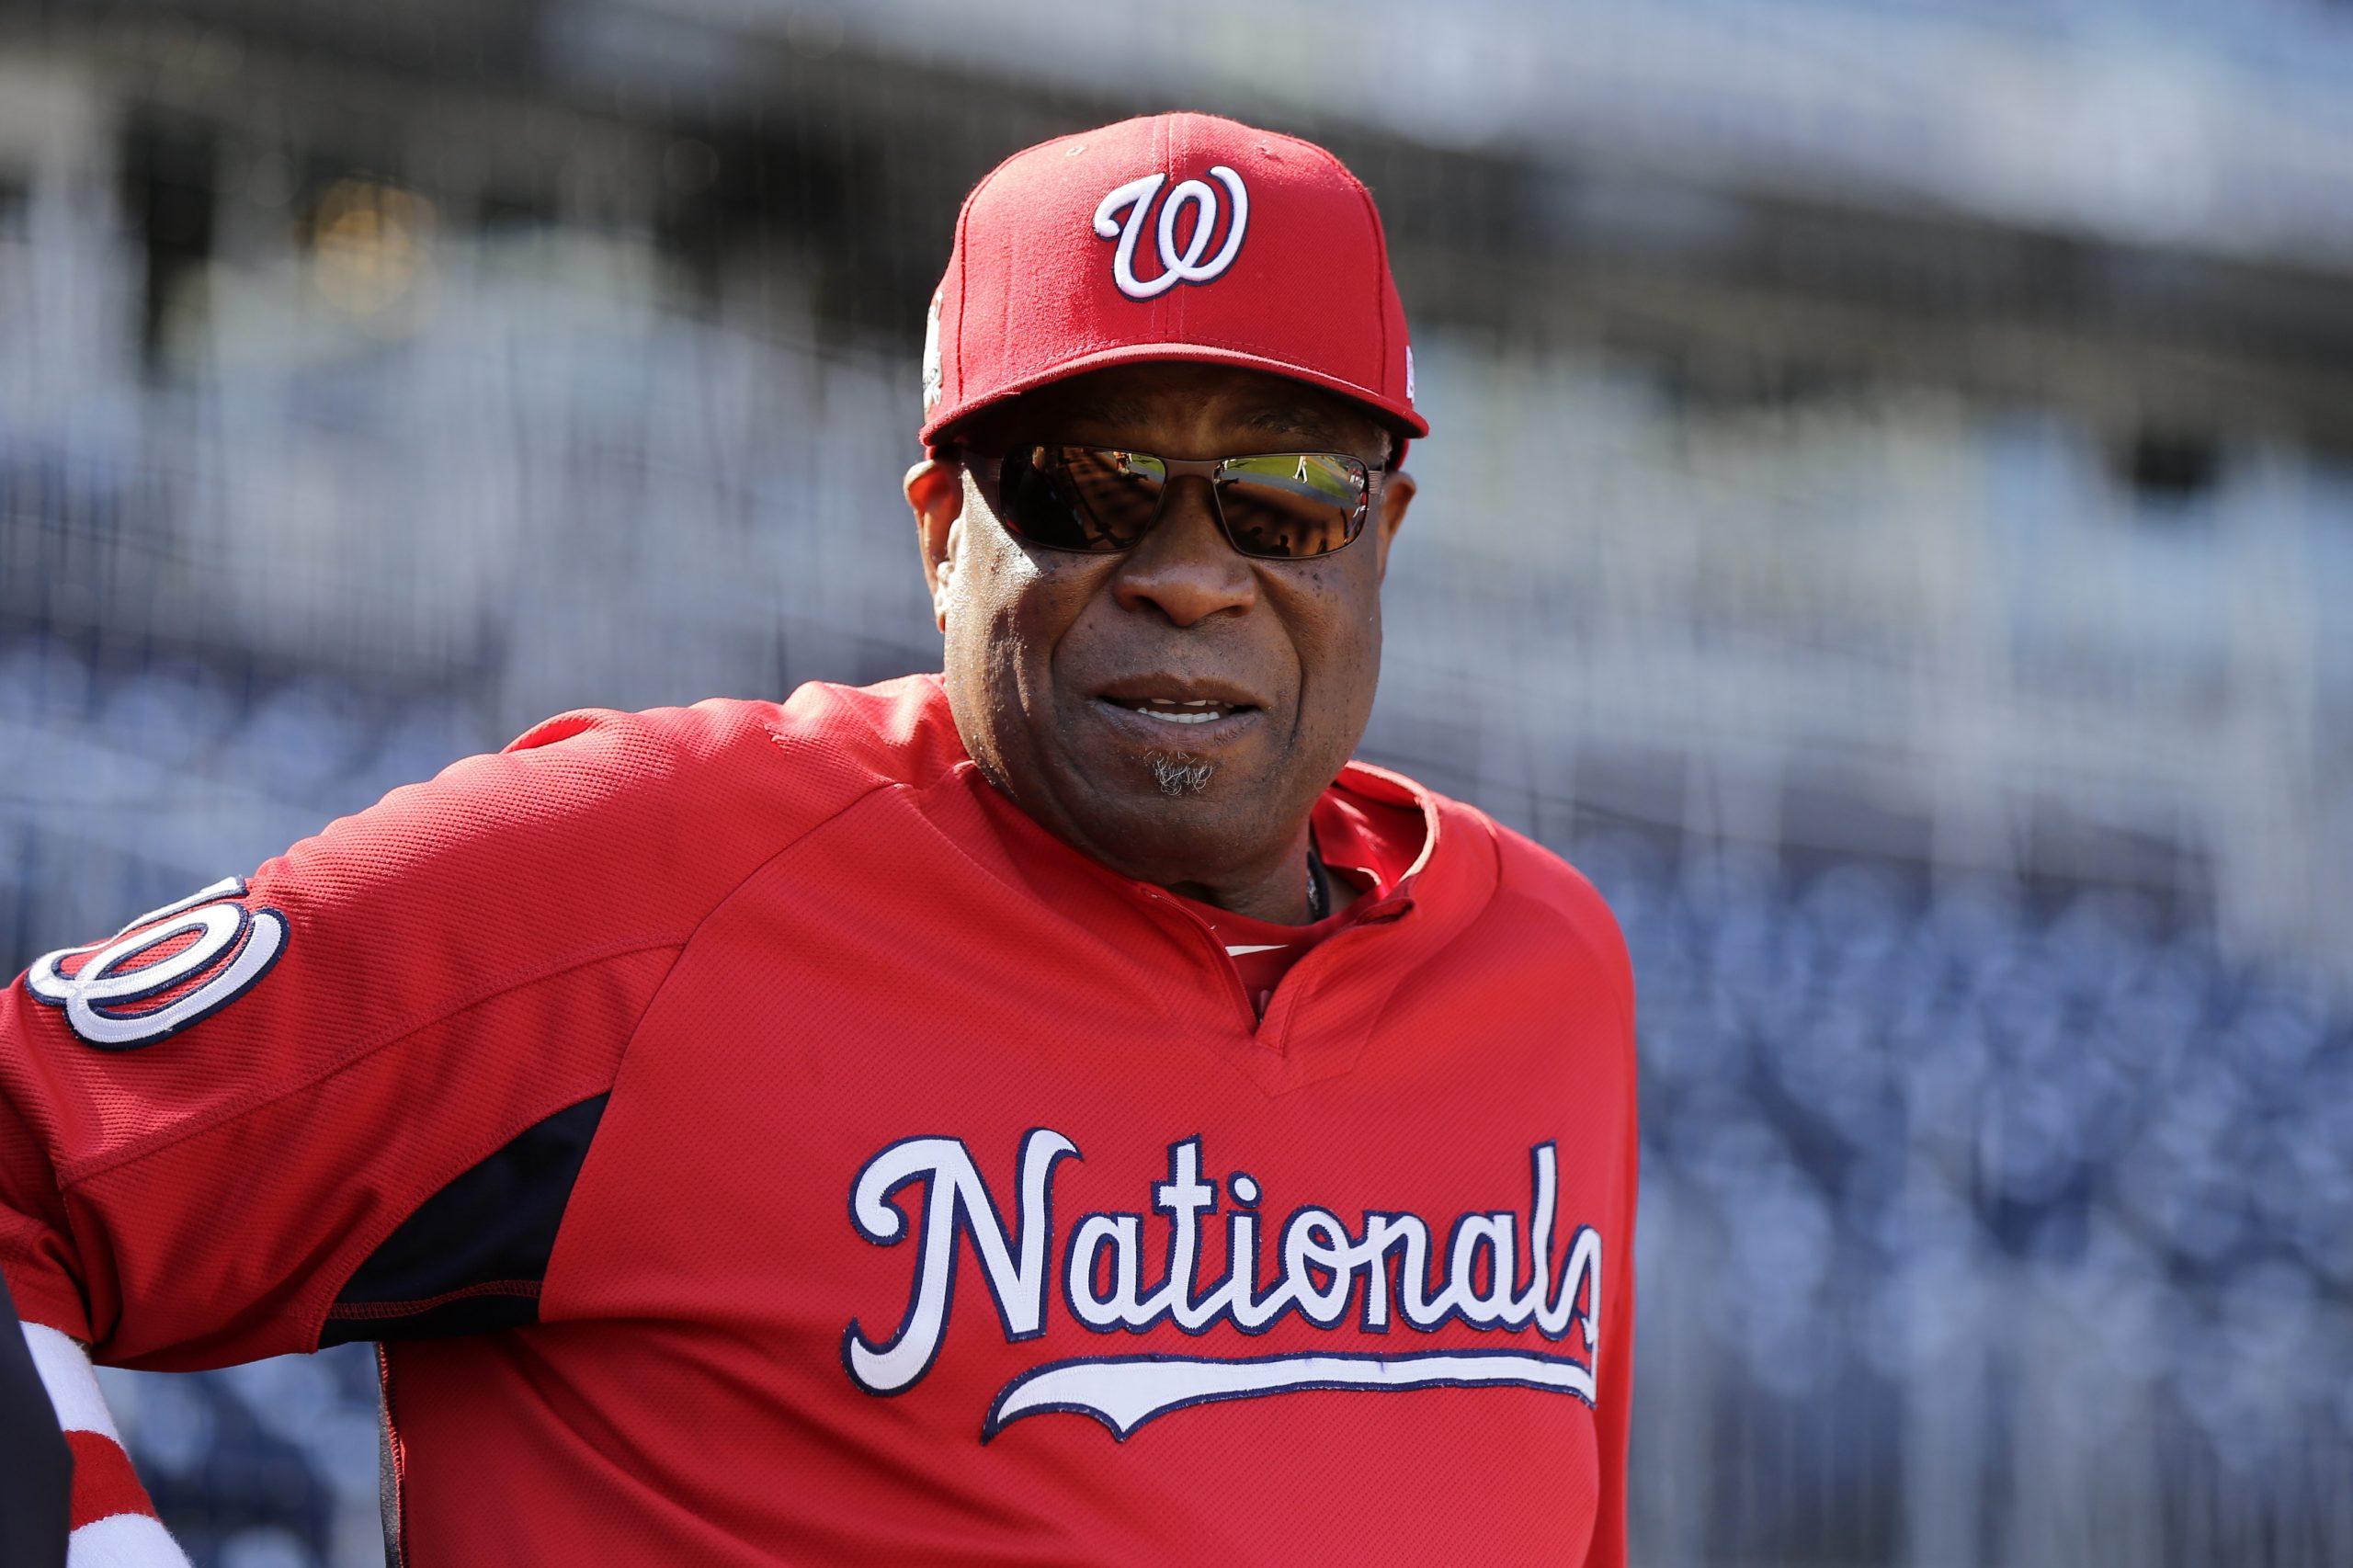 Houston Astros manager Dusty Baker's baseball life has made him a